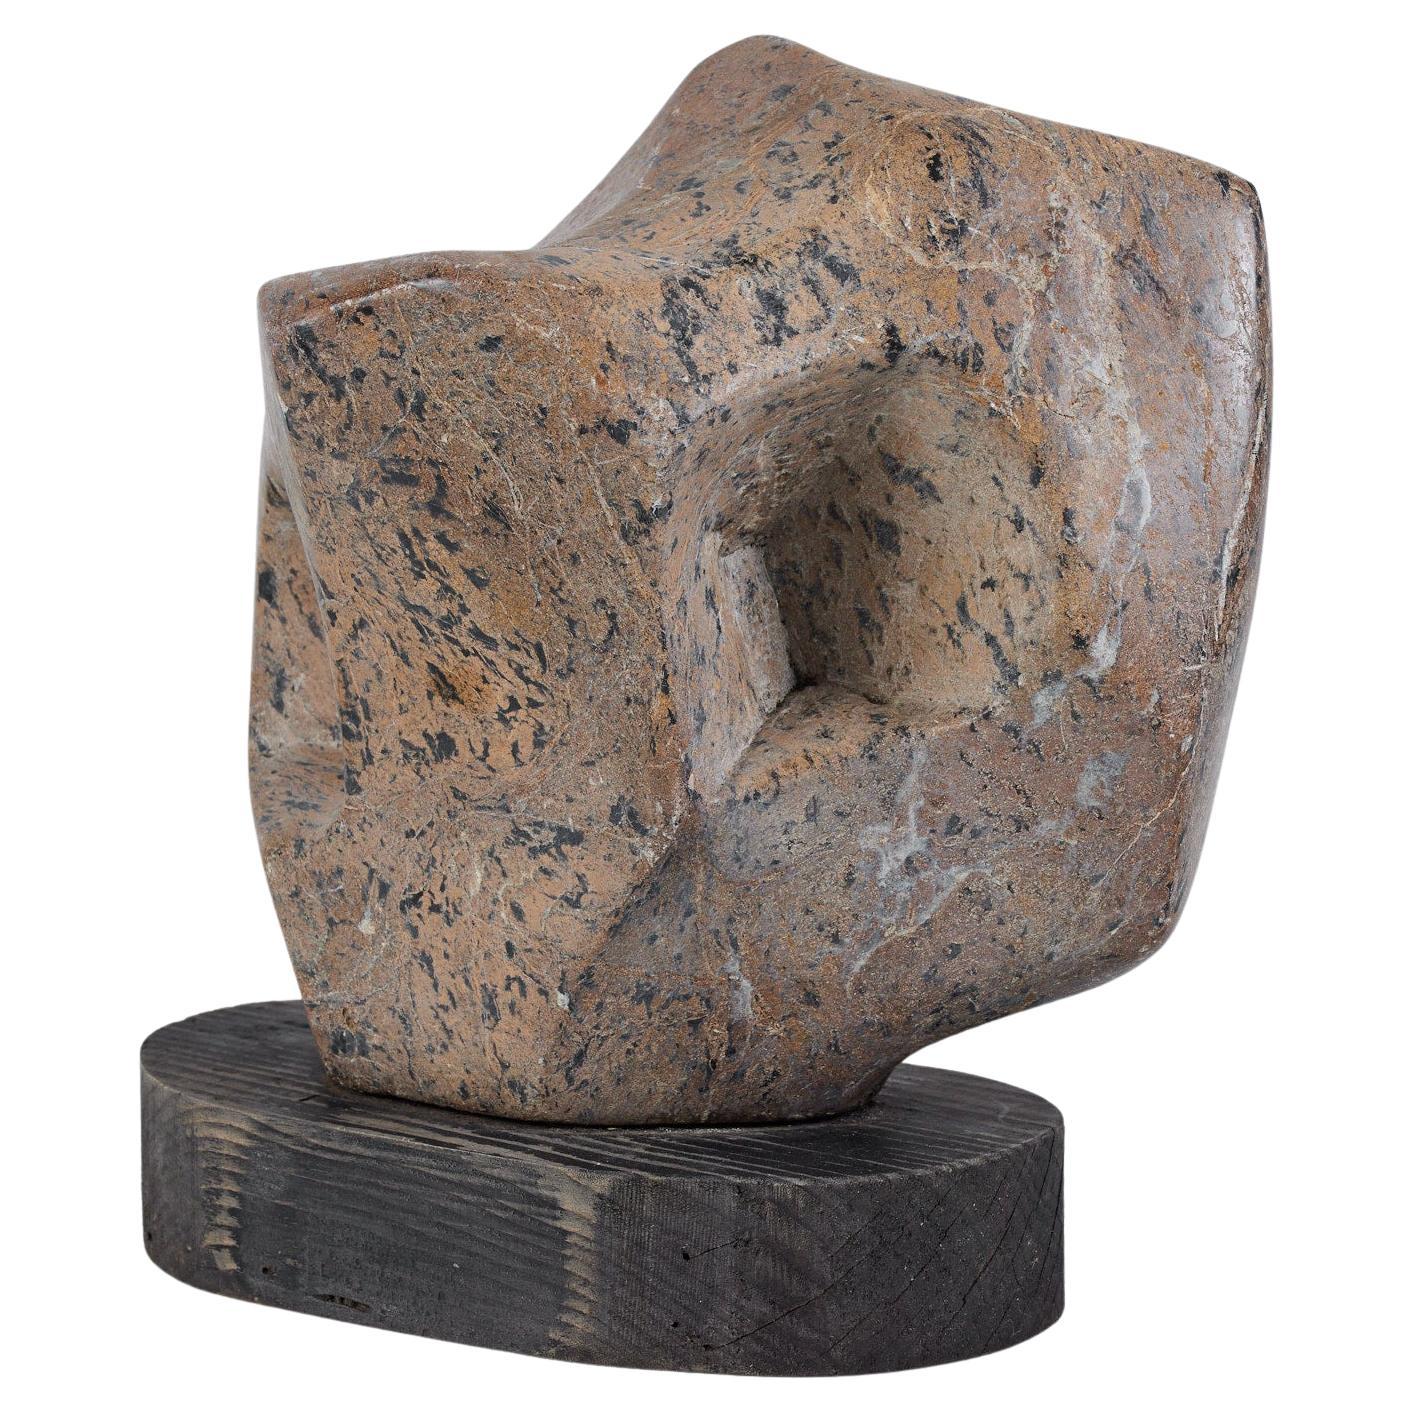 Biomorphic Stone Sculpture with Wood Plinth Base